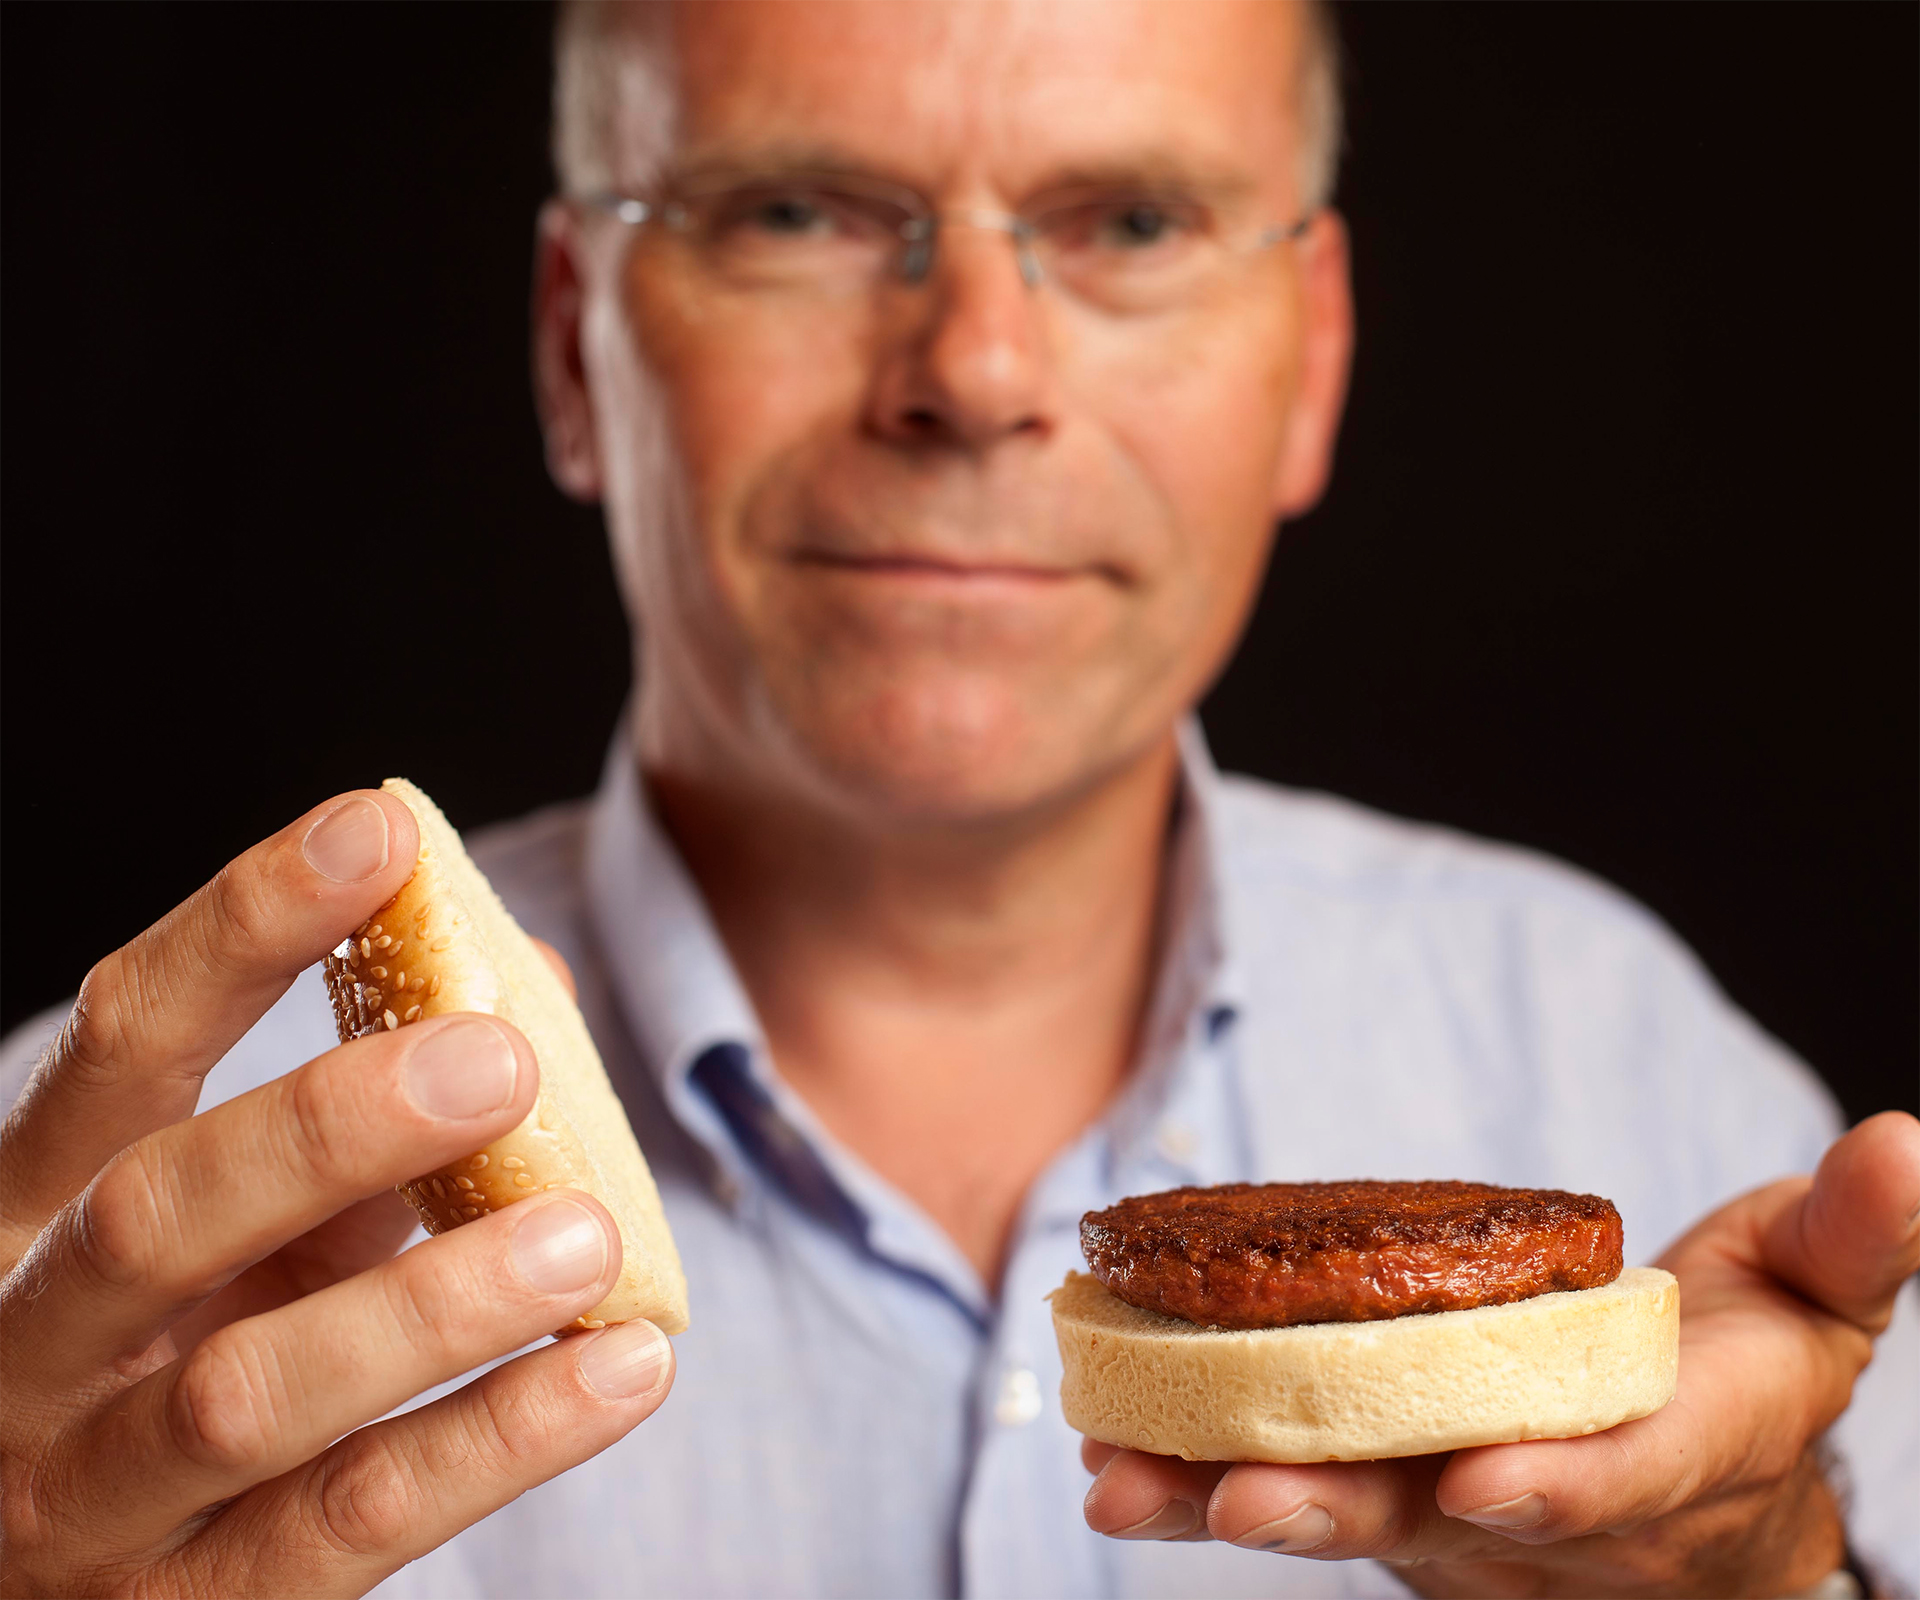 Are you ready for the world’s first test tube burger?